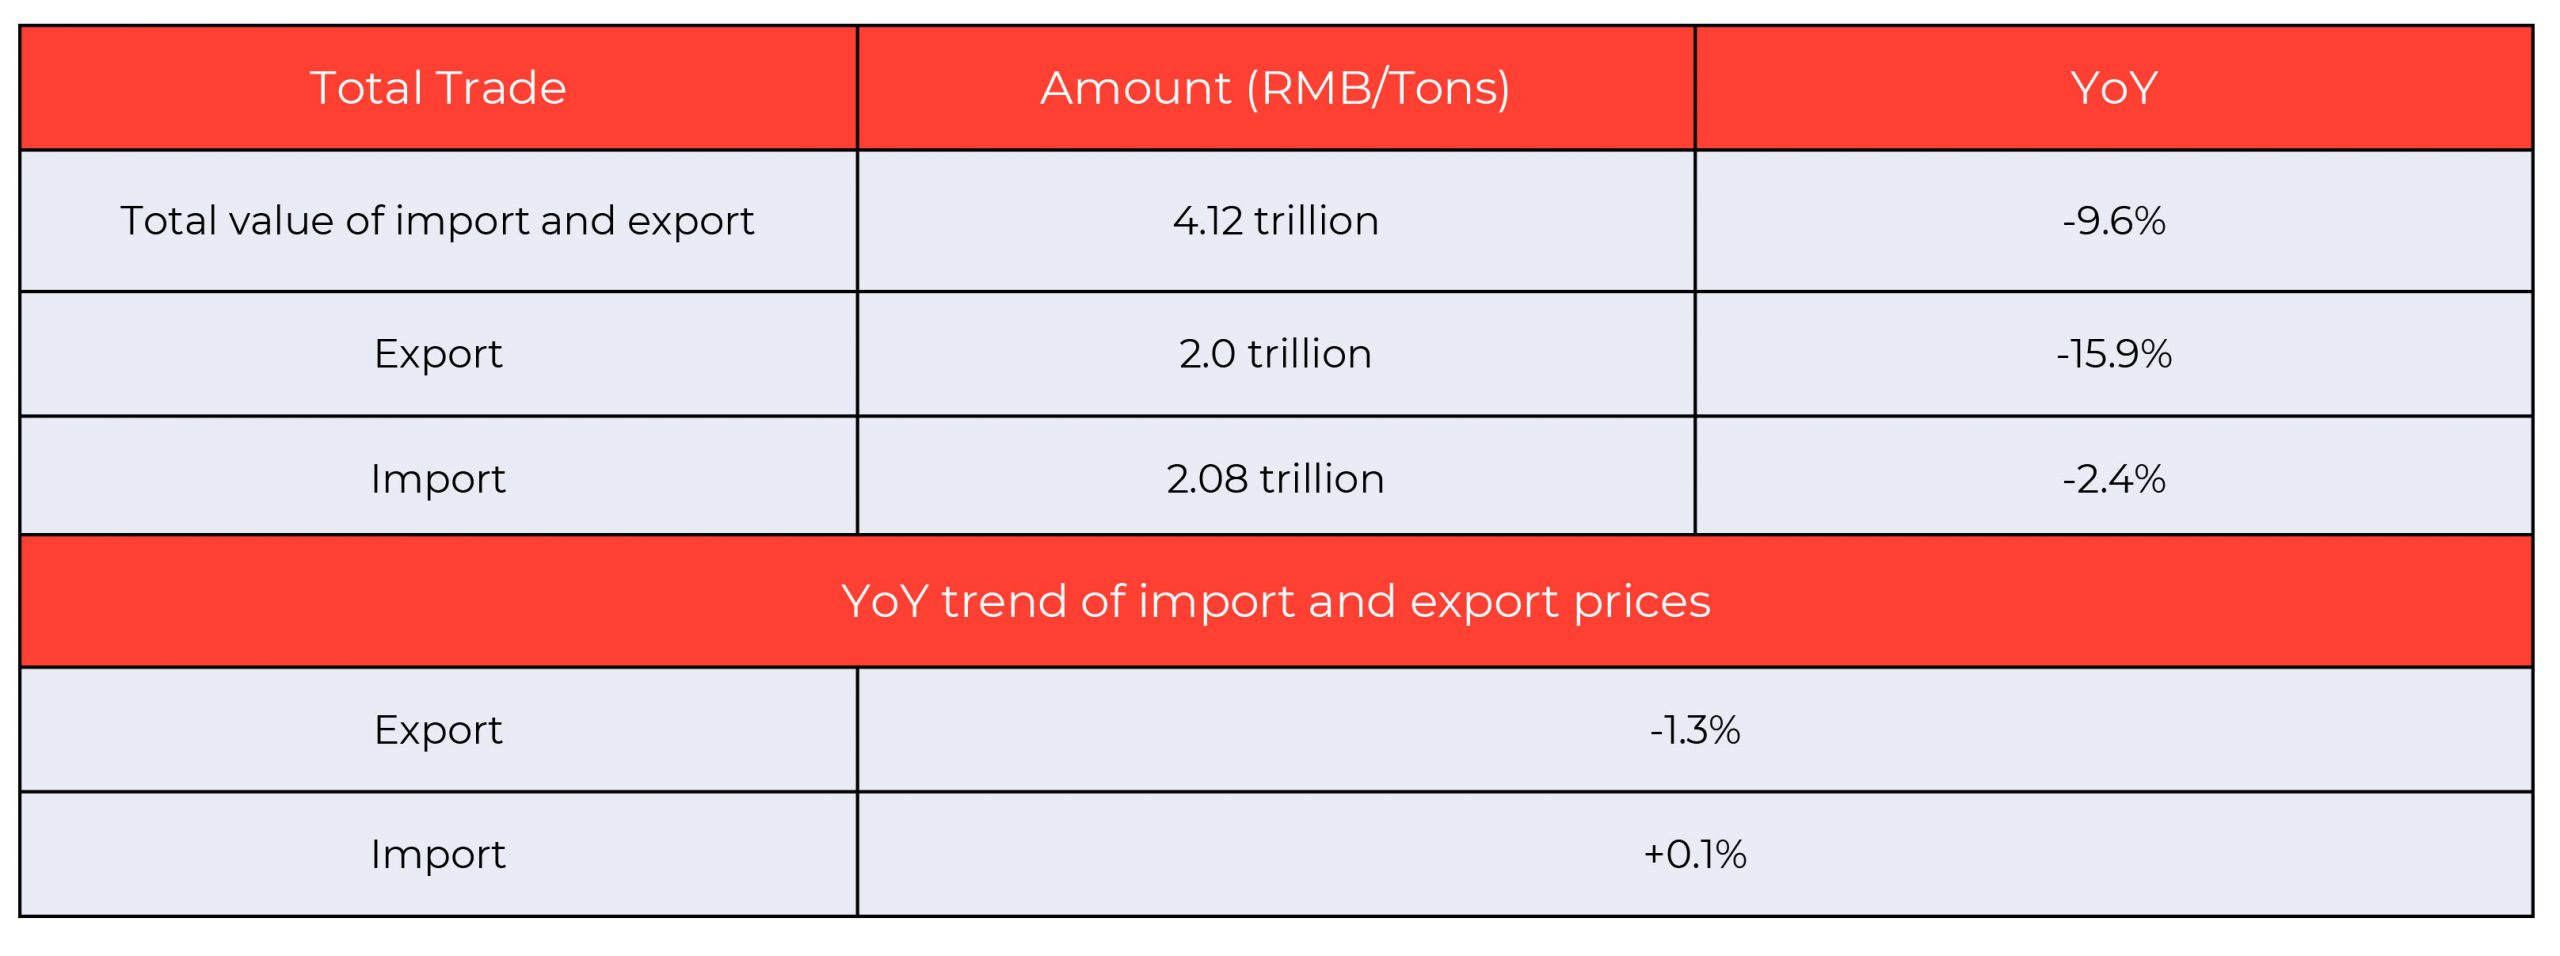 China’s total export and import value of traded goods